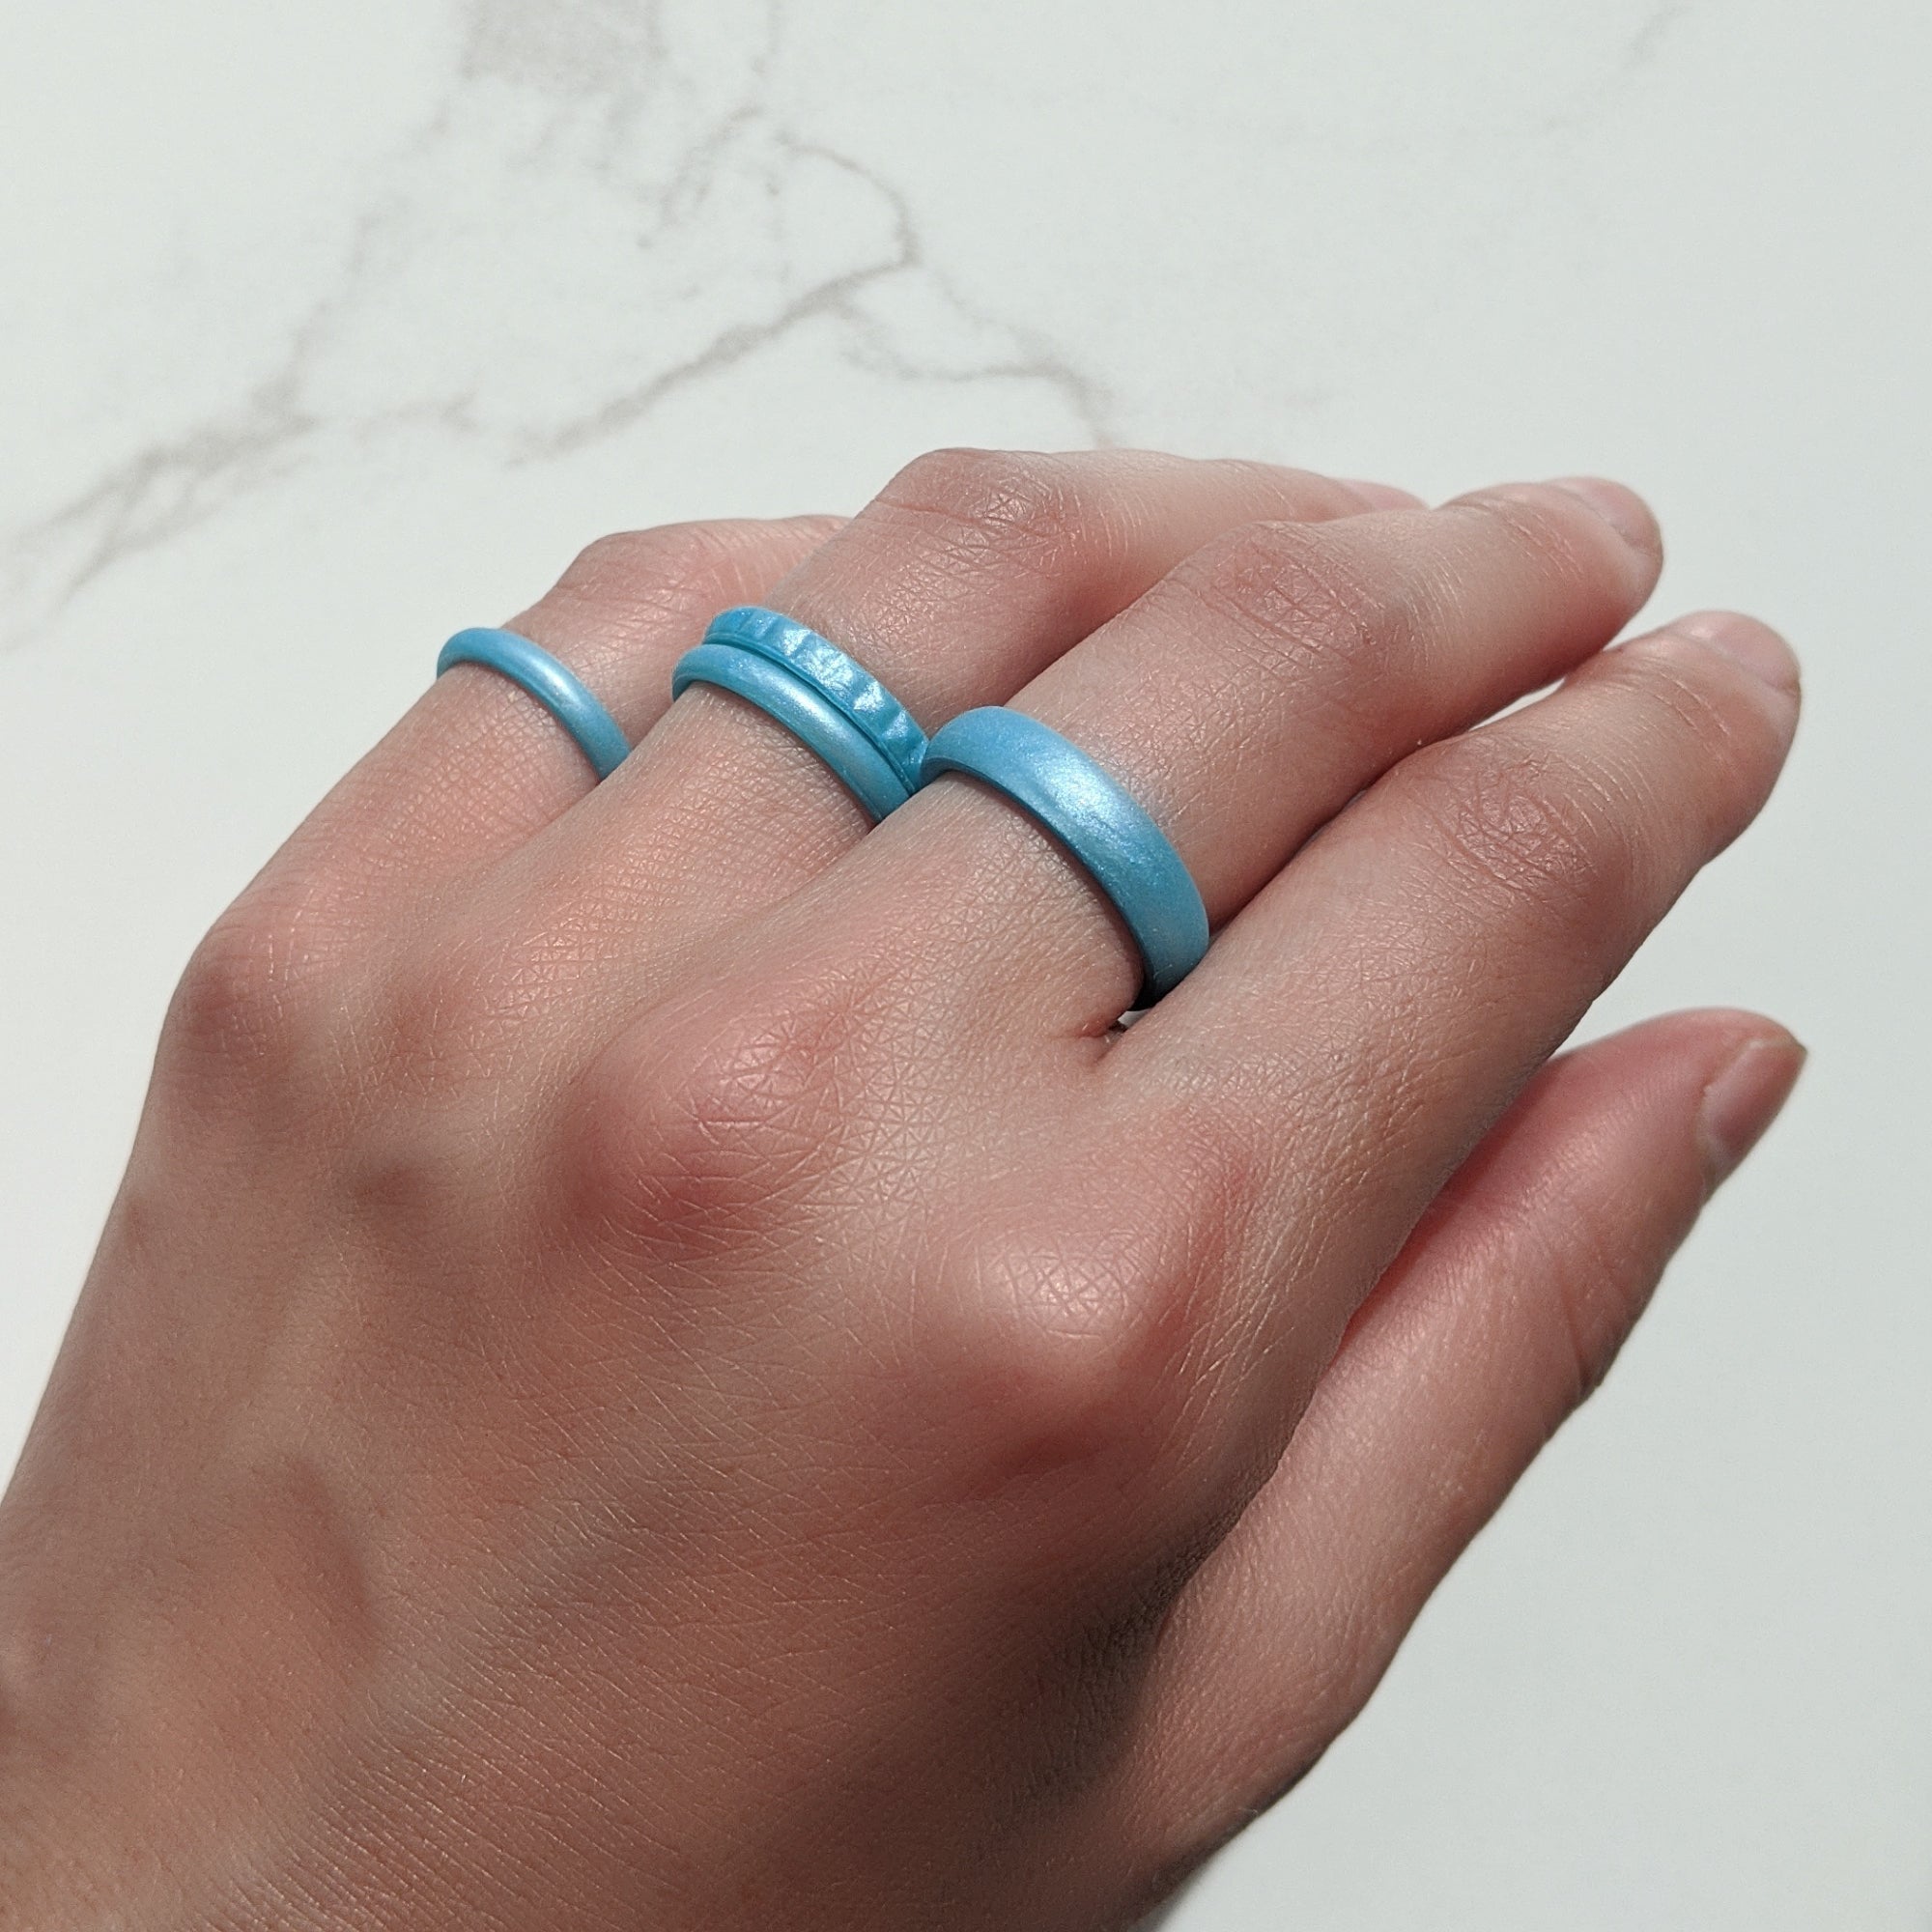 Pearl Baby Blue Pyramid Stackable Slim Thin Silicone Ring for Women - Knot Theory